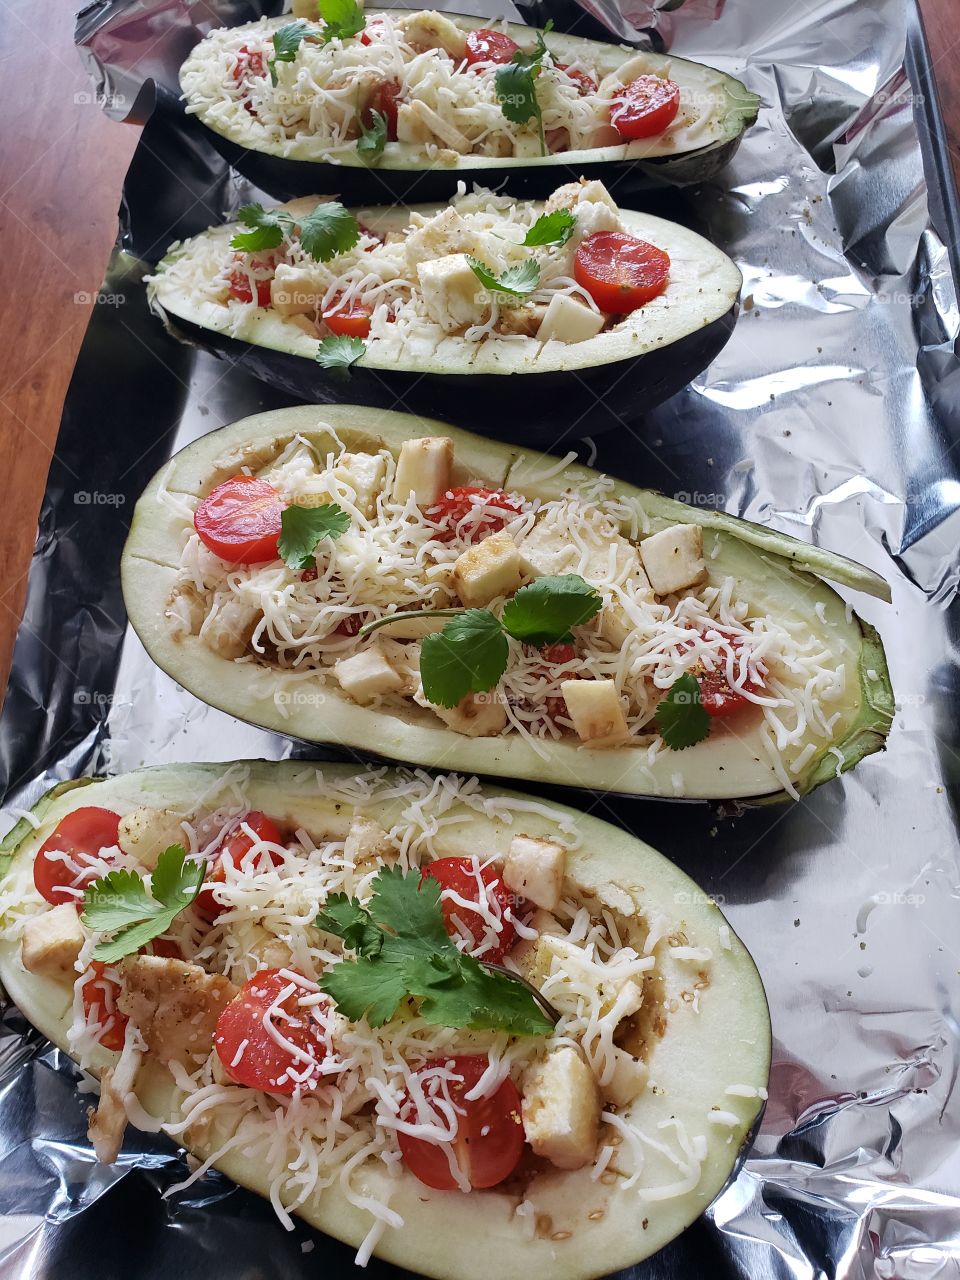 Eggplant with Turkey and parmesan cheese